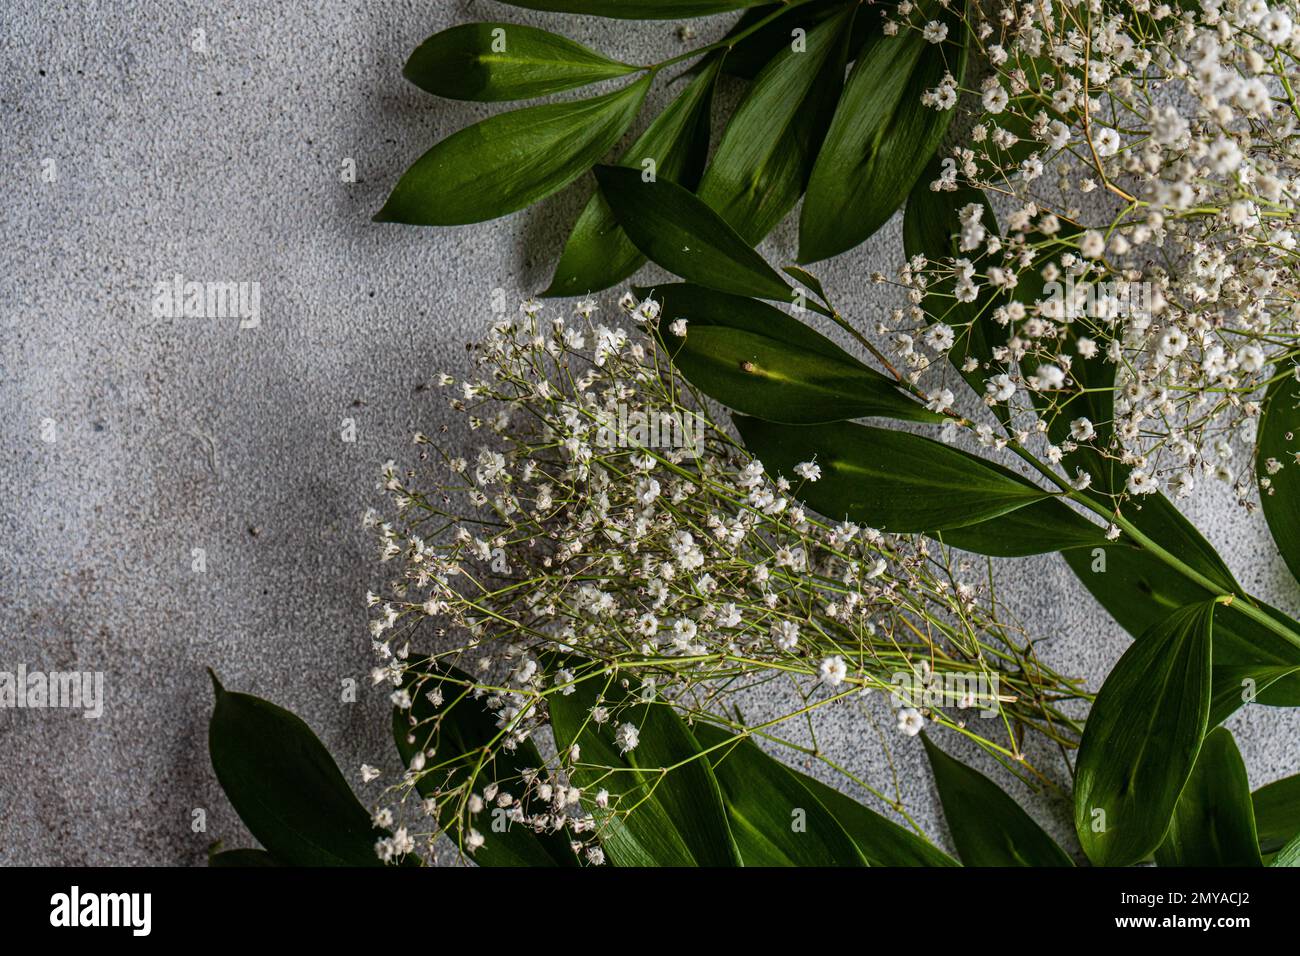 Spring nature flat lay with white Gypsophila flowers and green leaves of Ruscus plant Stock Photo